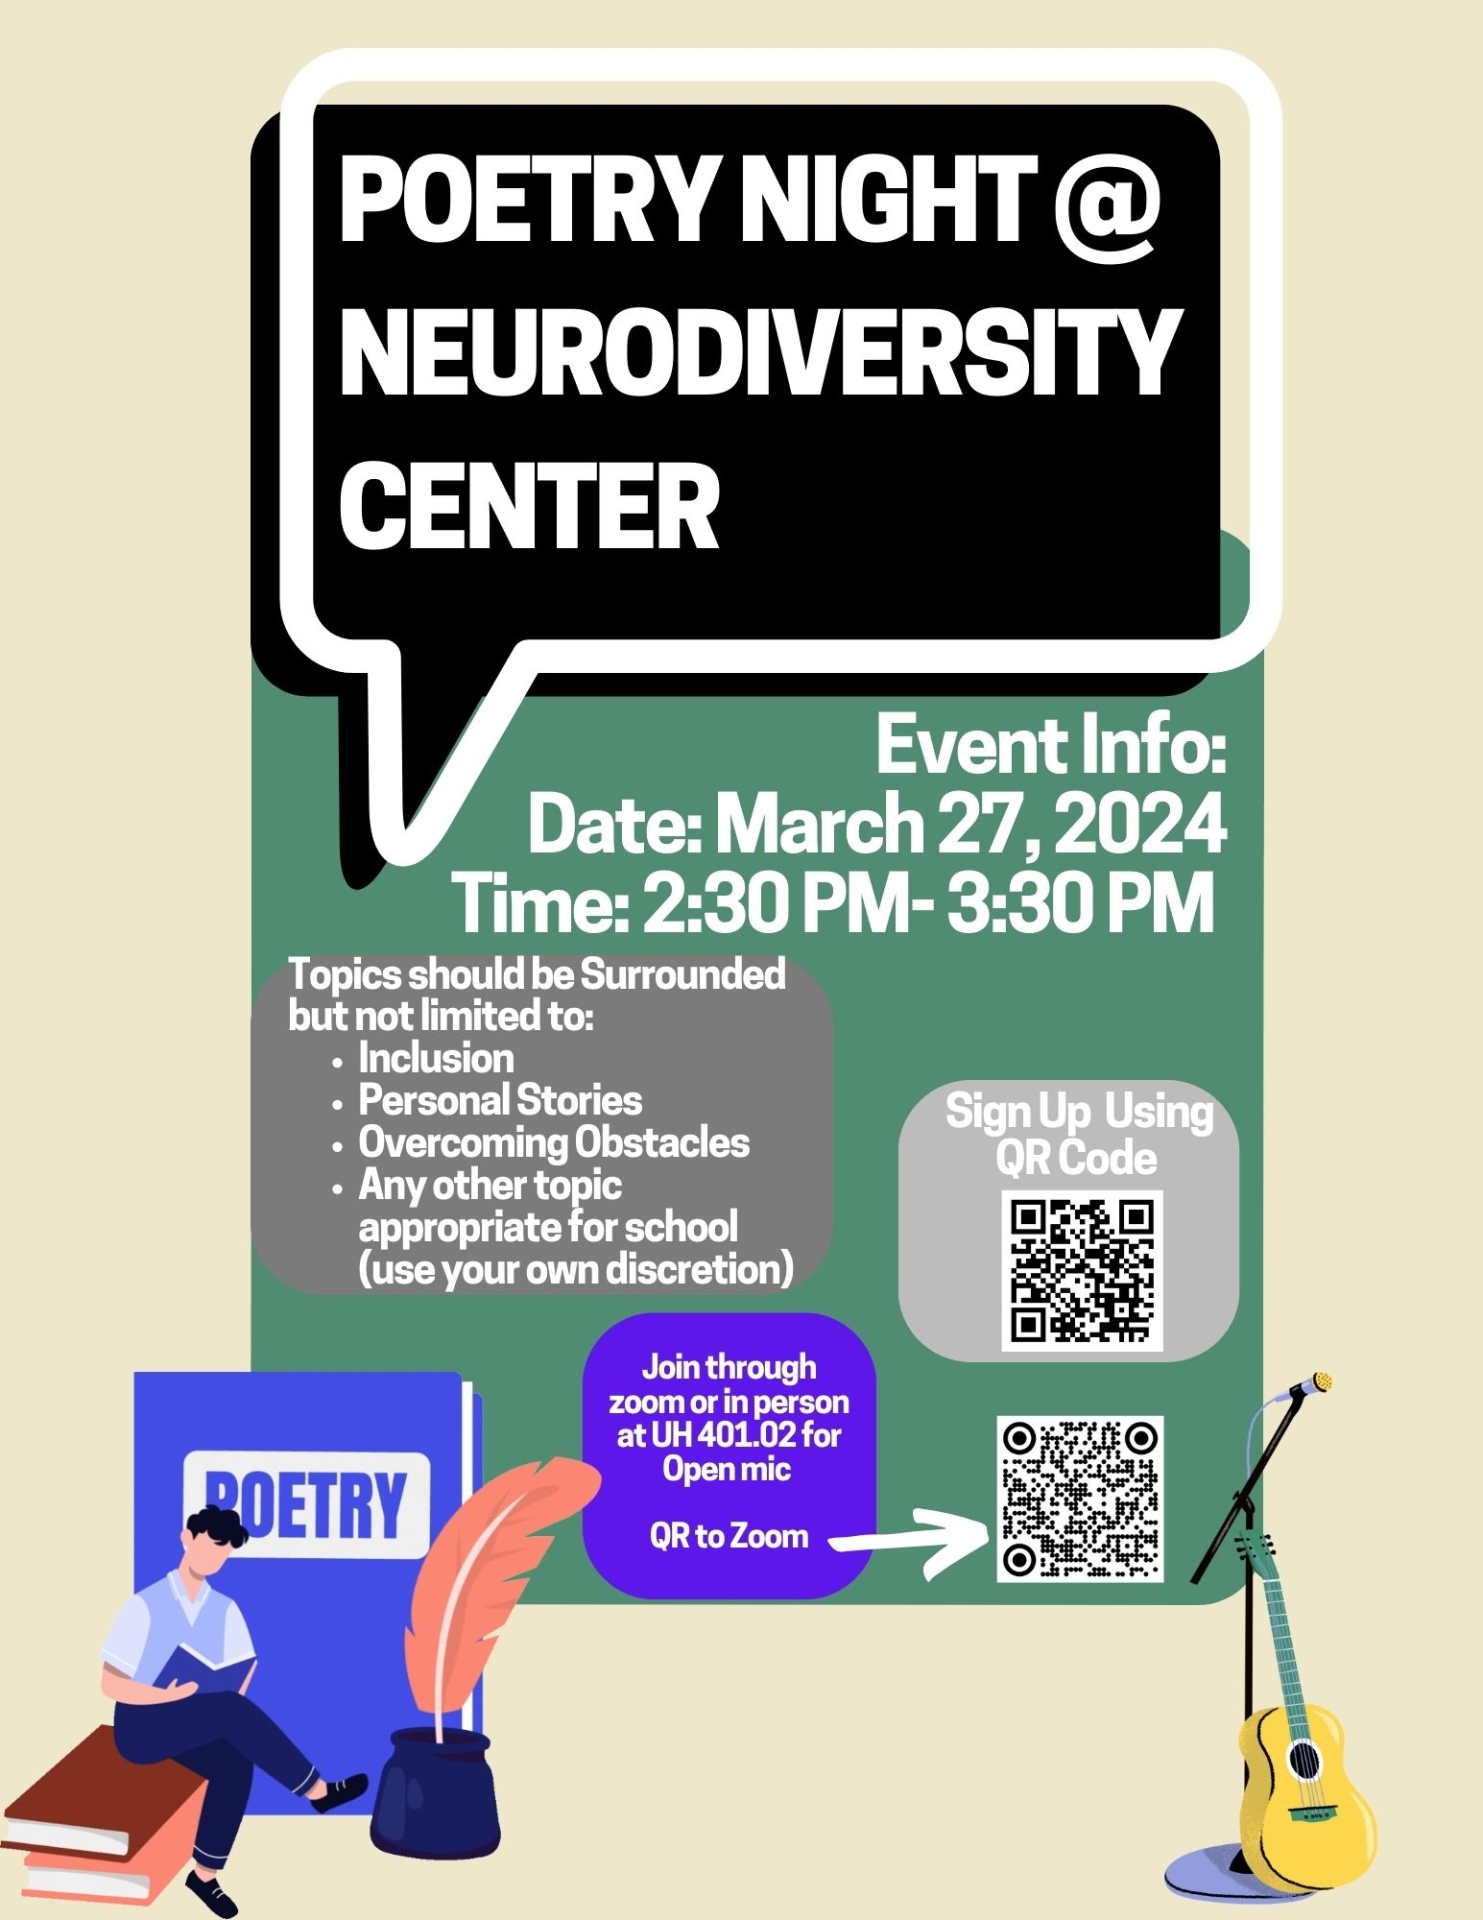 Poetry Night at Neurodiversity center. Event Info: Date: March 27, 2024 Time: 2:30 PM- 3:30 PM. Topics should be Surrounded but not limited to:  Inclusion Personal Stories Overcoming Obstacles  Any other topic appropriate for school (use your own discretion). Sign Up  Using QR Code. Join through zoom or in person at UH 401.02 for Open mic QR to Zoom. 